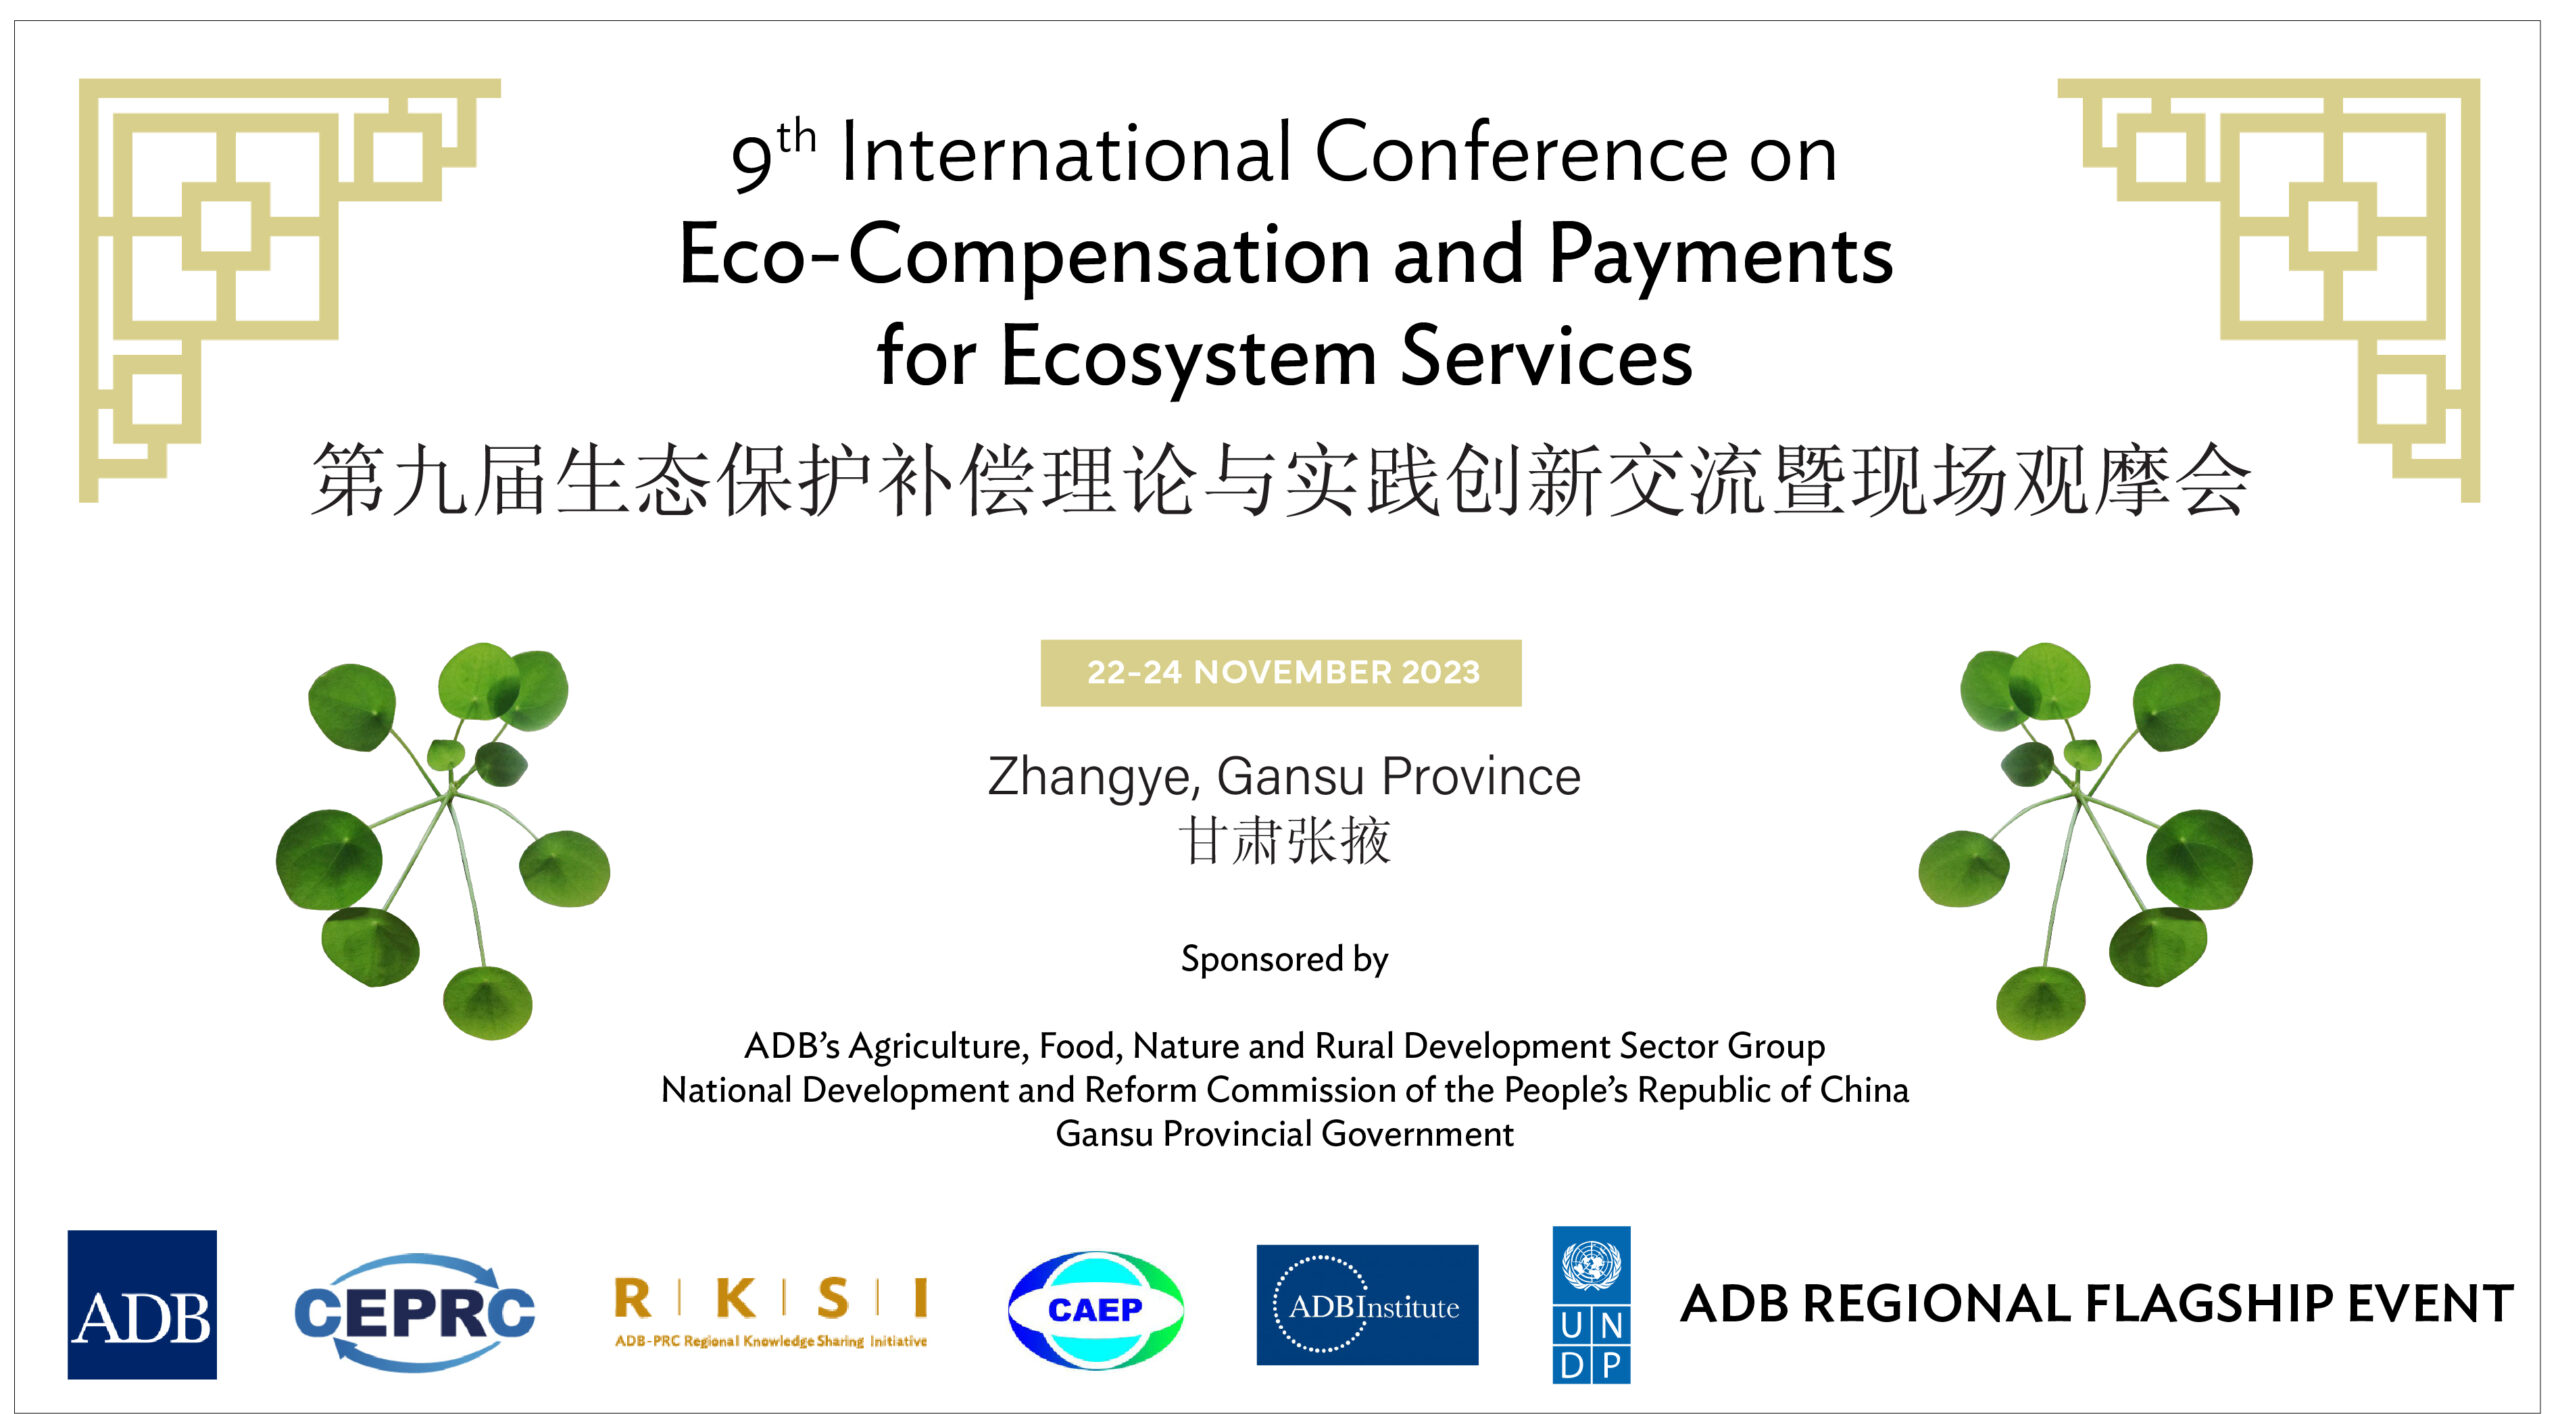 Laws and Regulations Enabling Eco-Compensation and PES